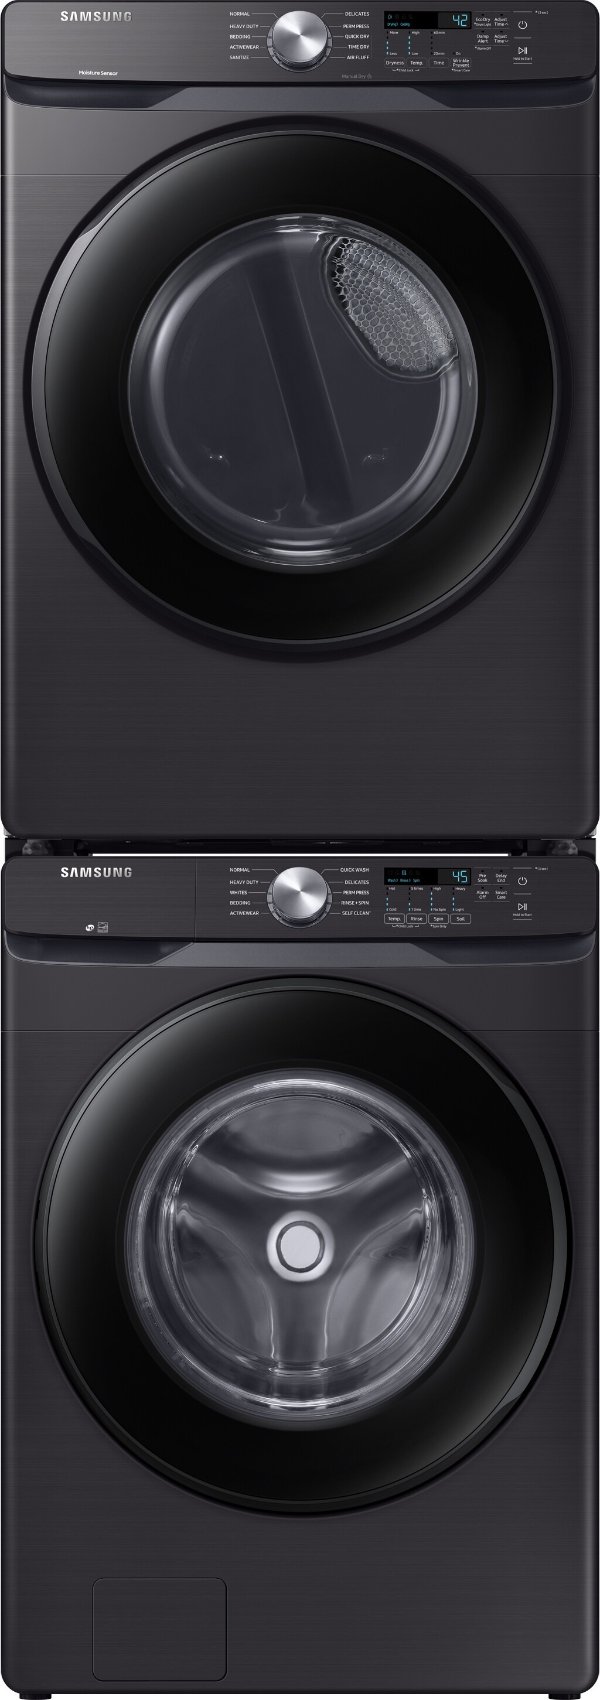 Samsung SAWADRGV6002 Stacked Washer & Dryer Set with Front Load Washer and Gas Dryer in Black